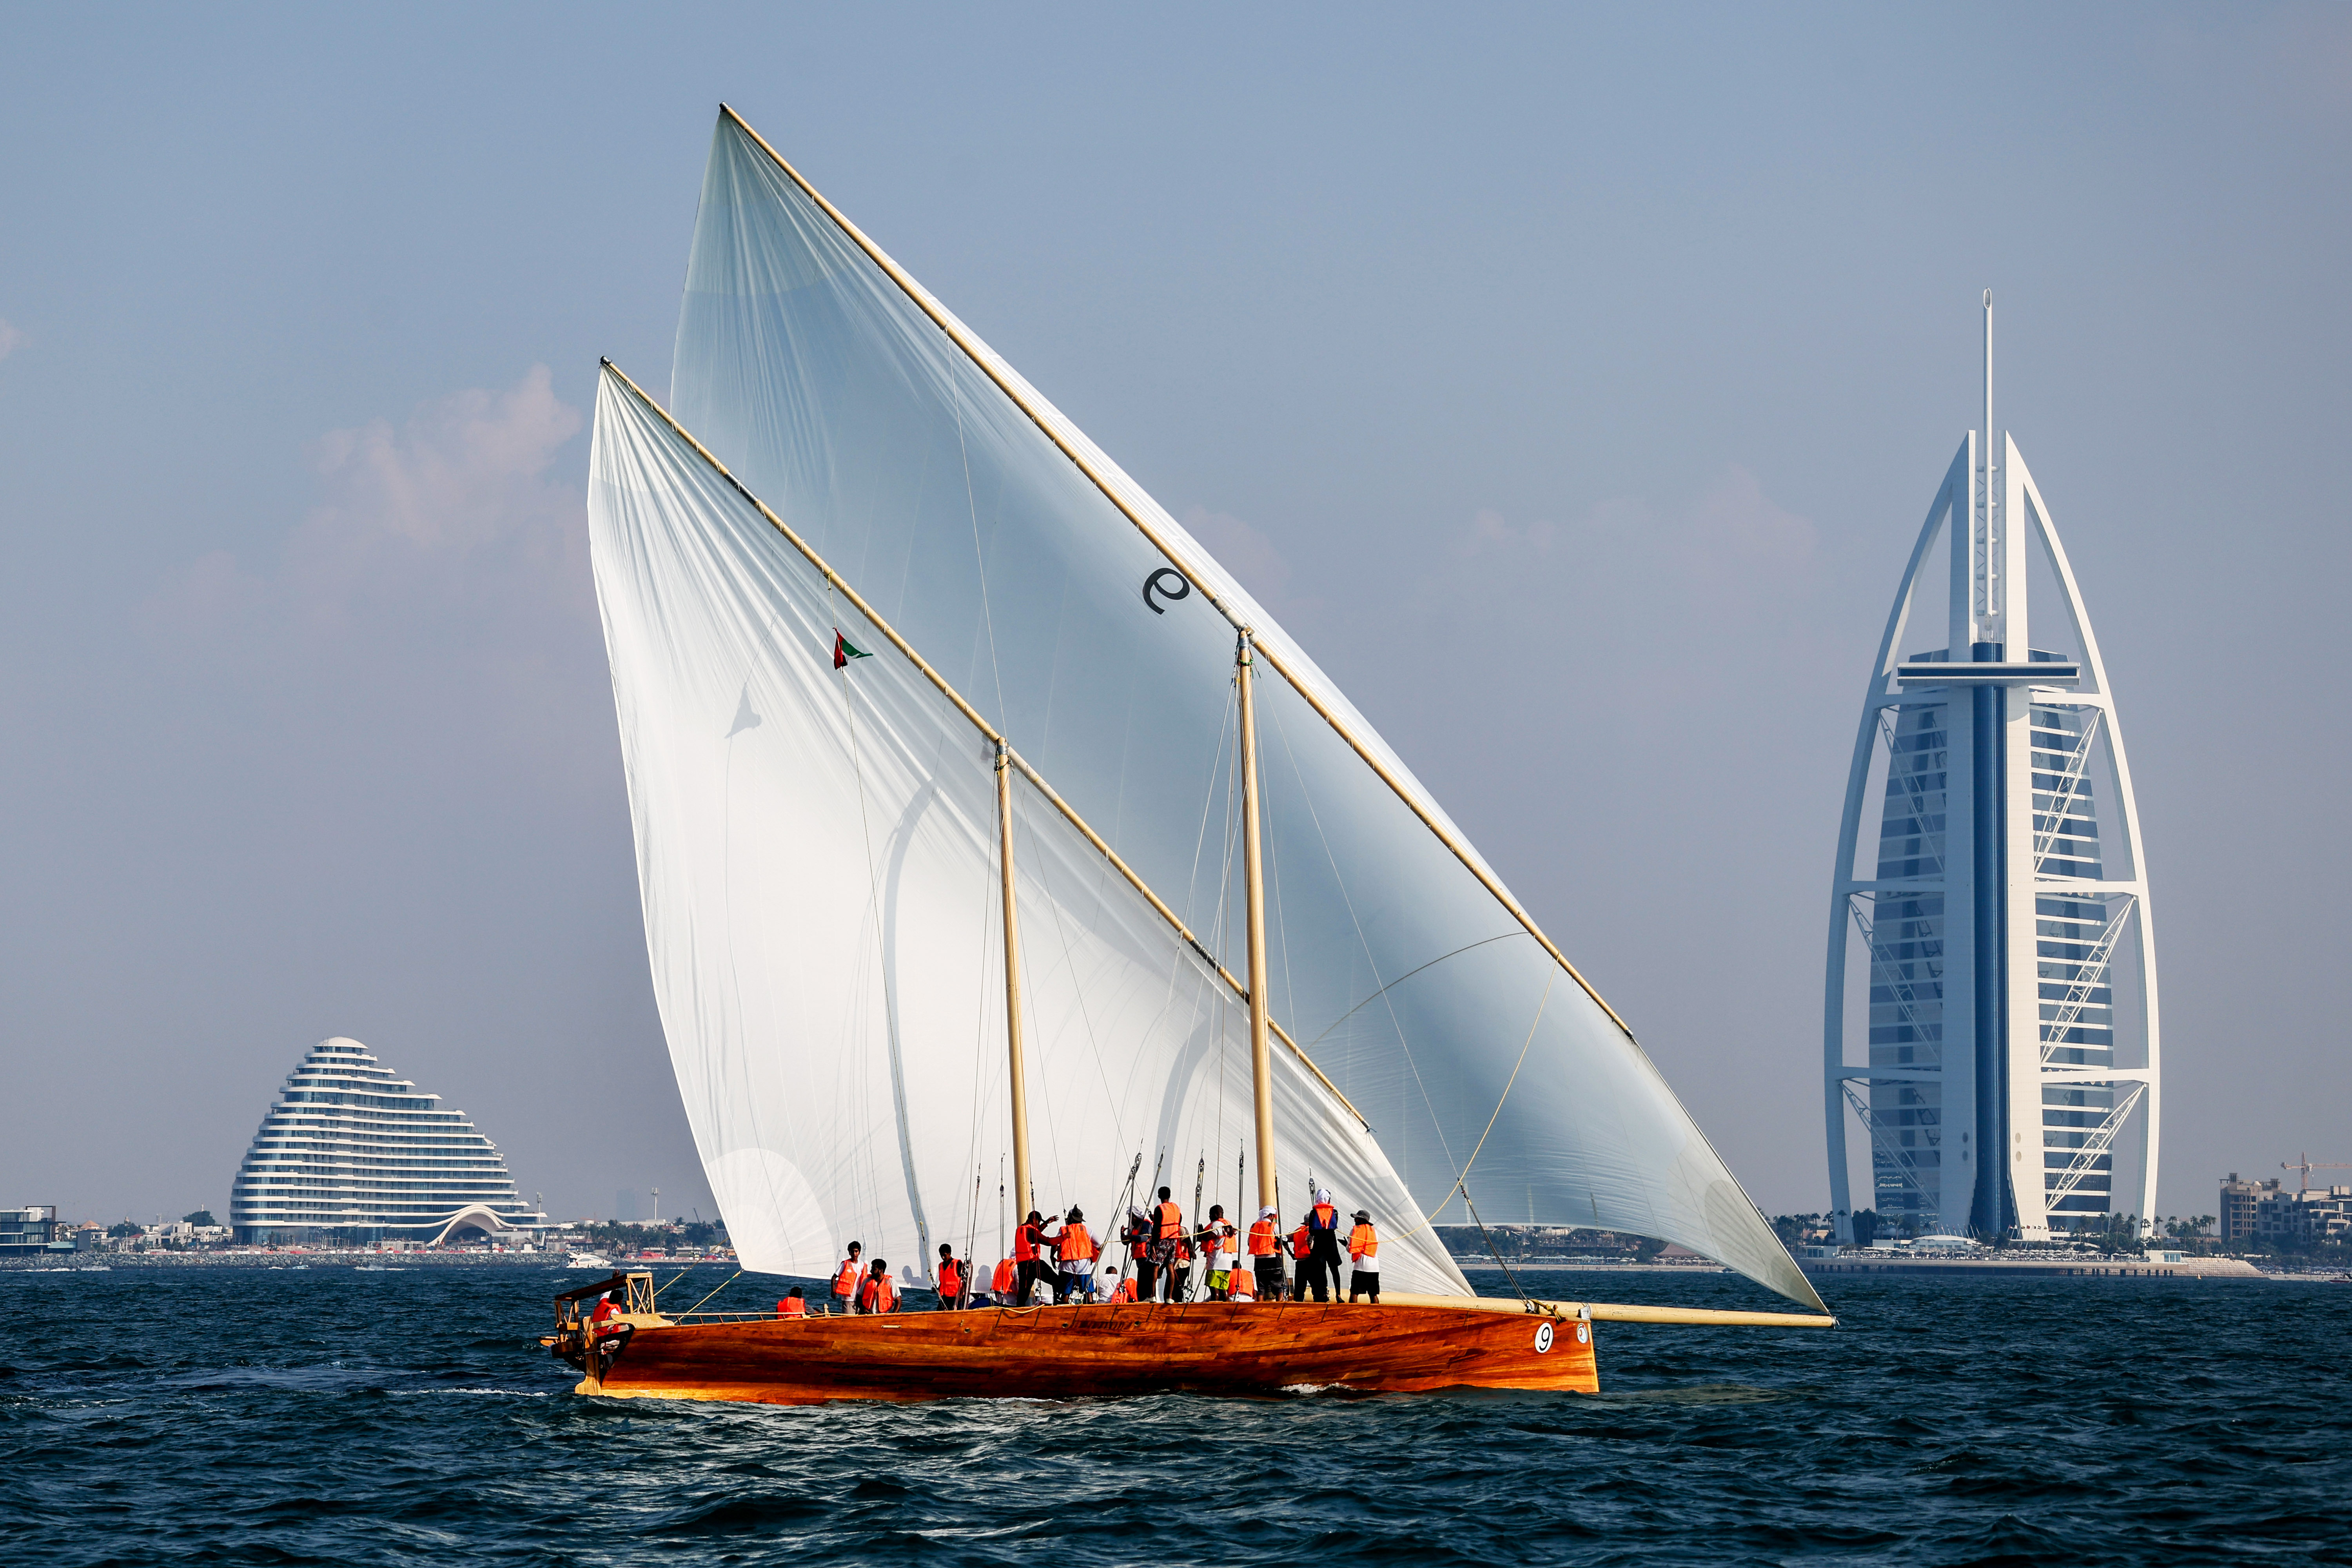 Registration continues for Dubai Traditional Dhow Sailing Races